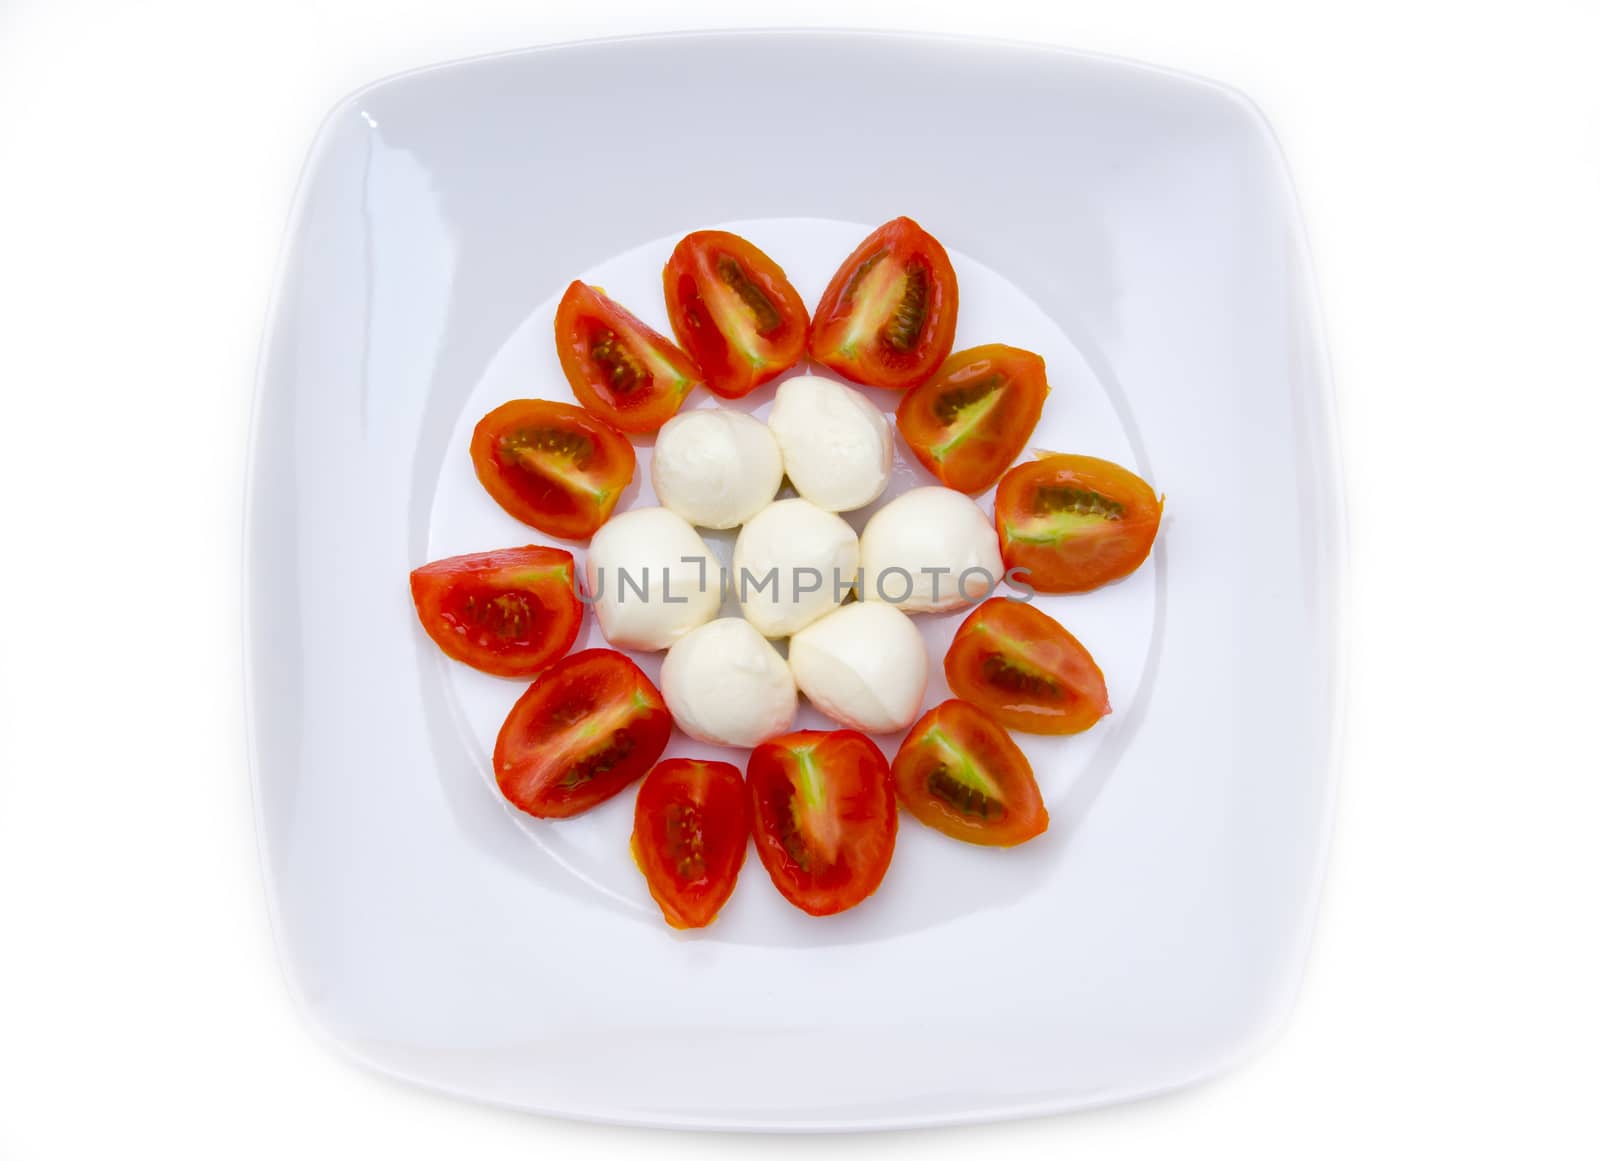 Plate with mozzarella and tomato on white background seen from above